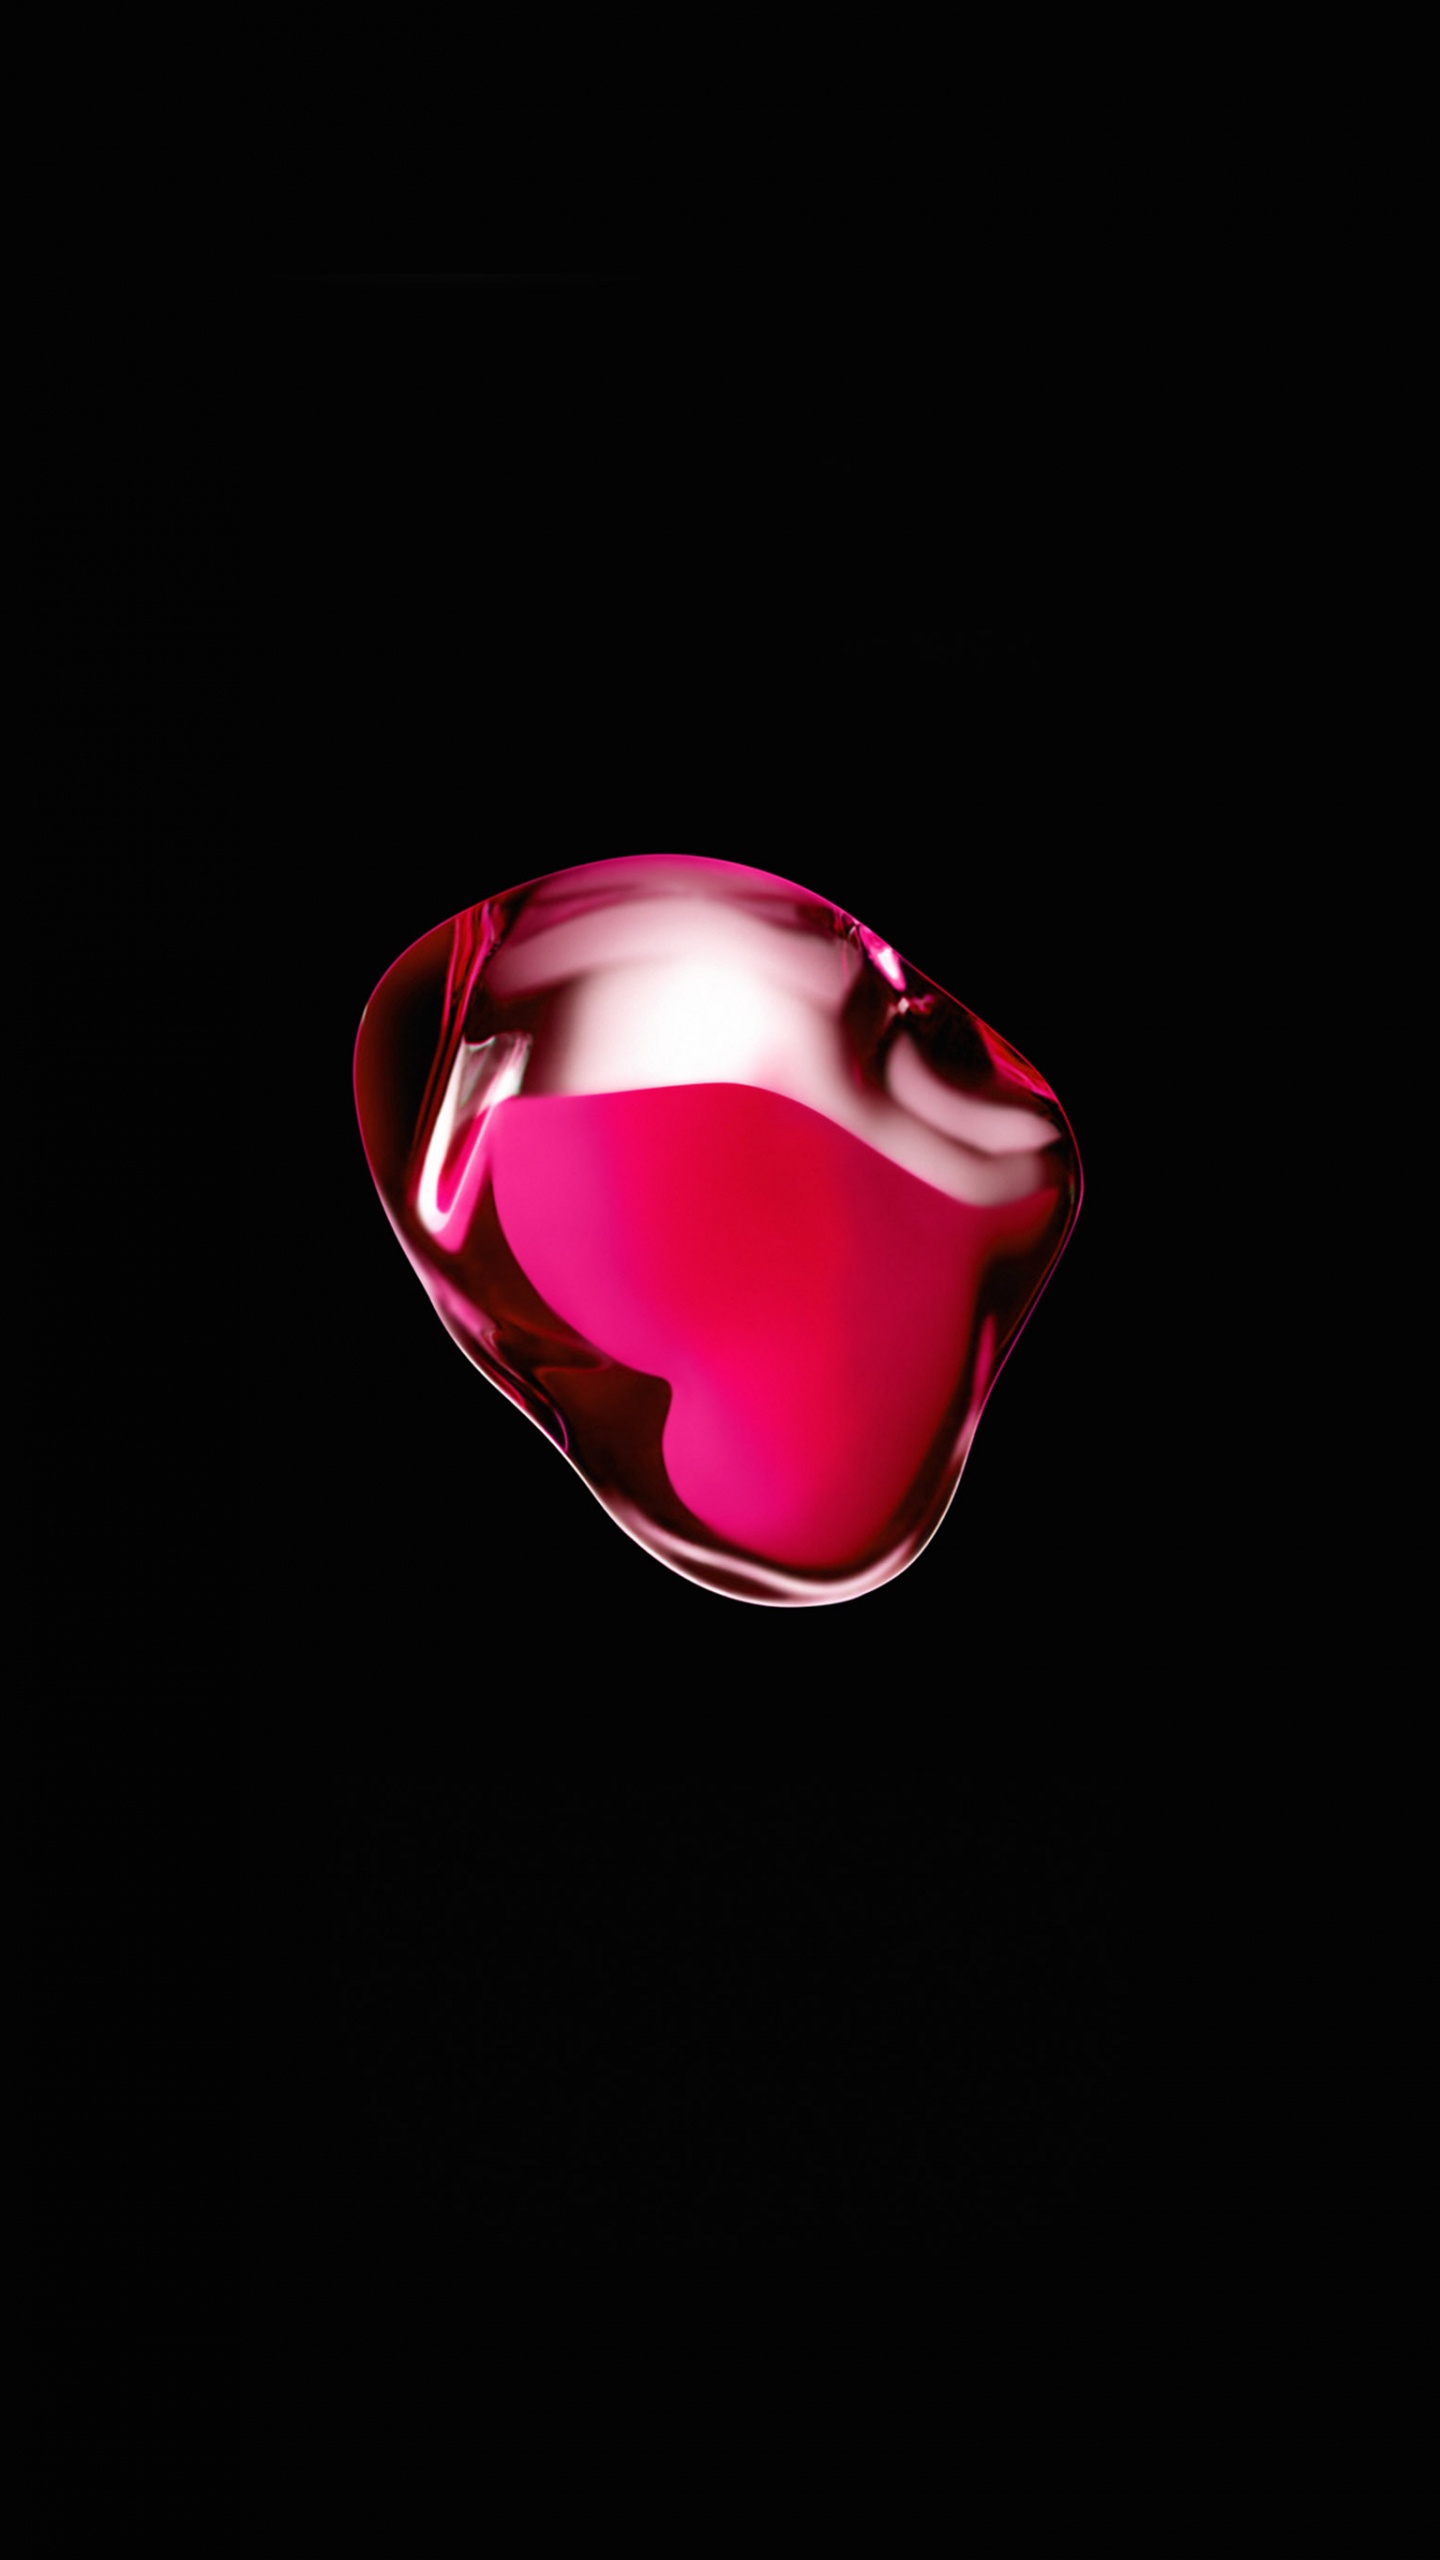 Pink and Silver Heart Ornament. Wallpaper in 1440x2560 Resolution